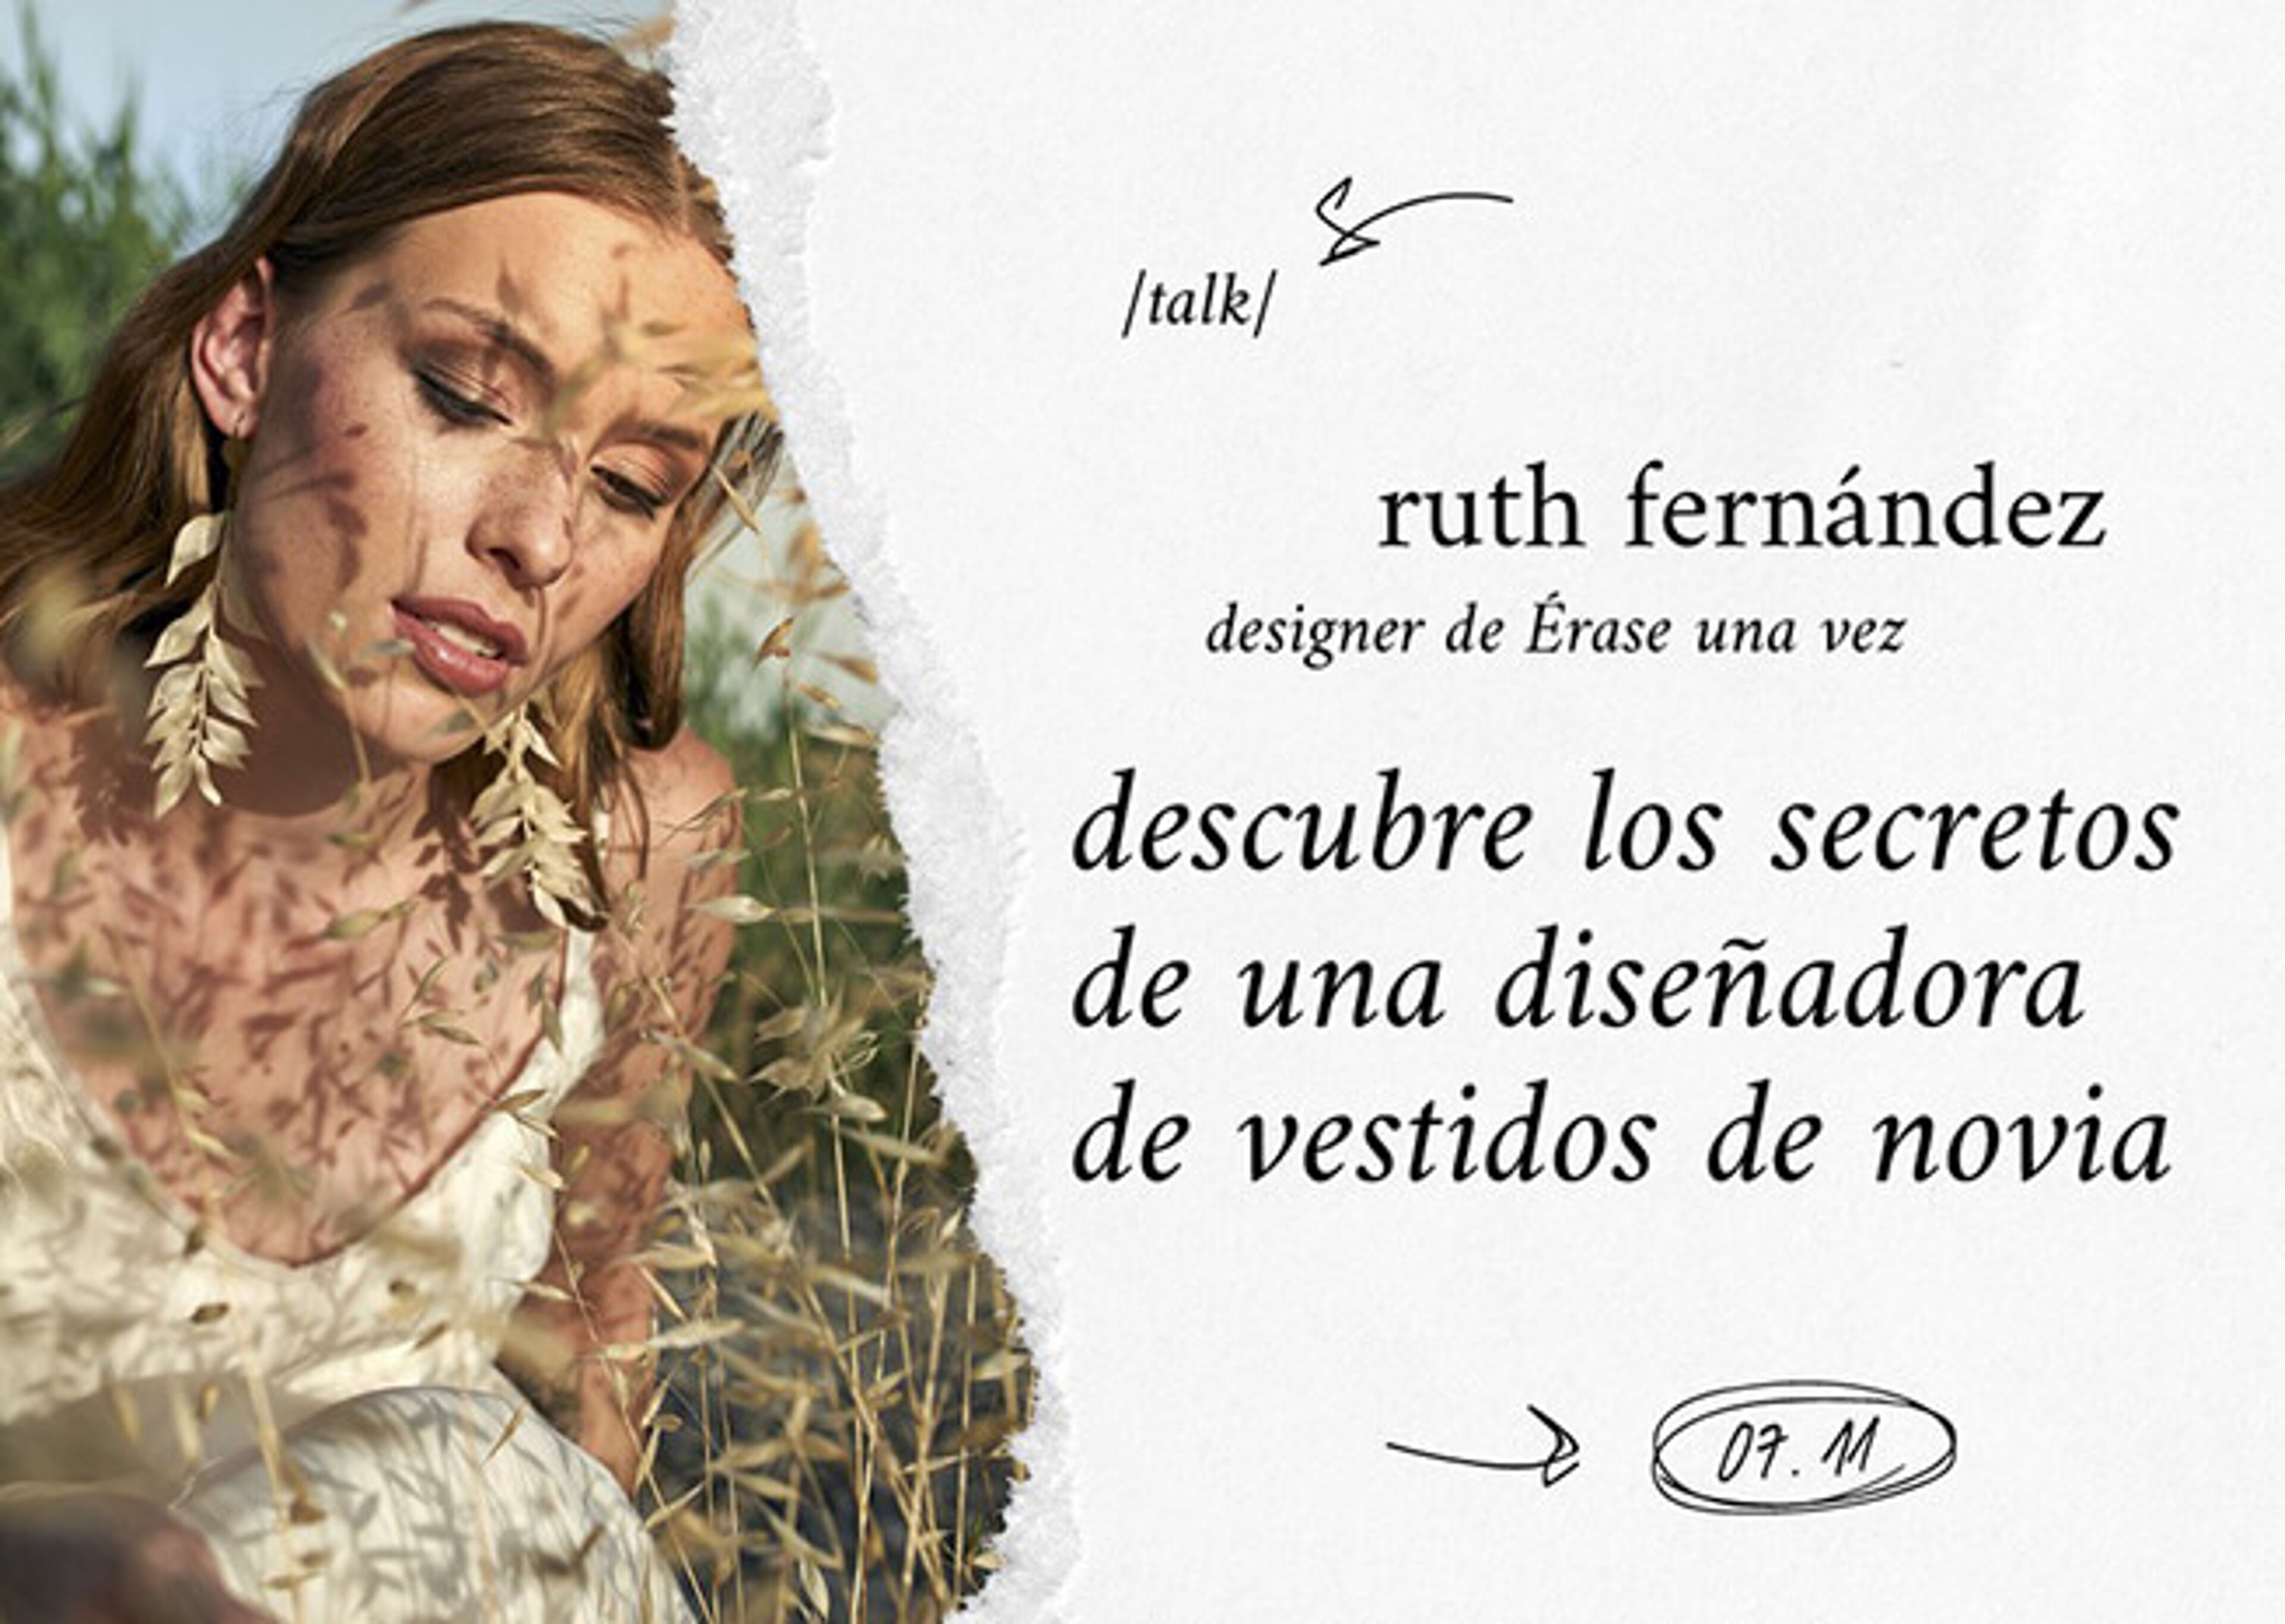 An announcement for a talk by Ruth Fernández, a bridal dress designer, featuring an image of a woman in a field with a torn paper design.